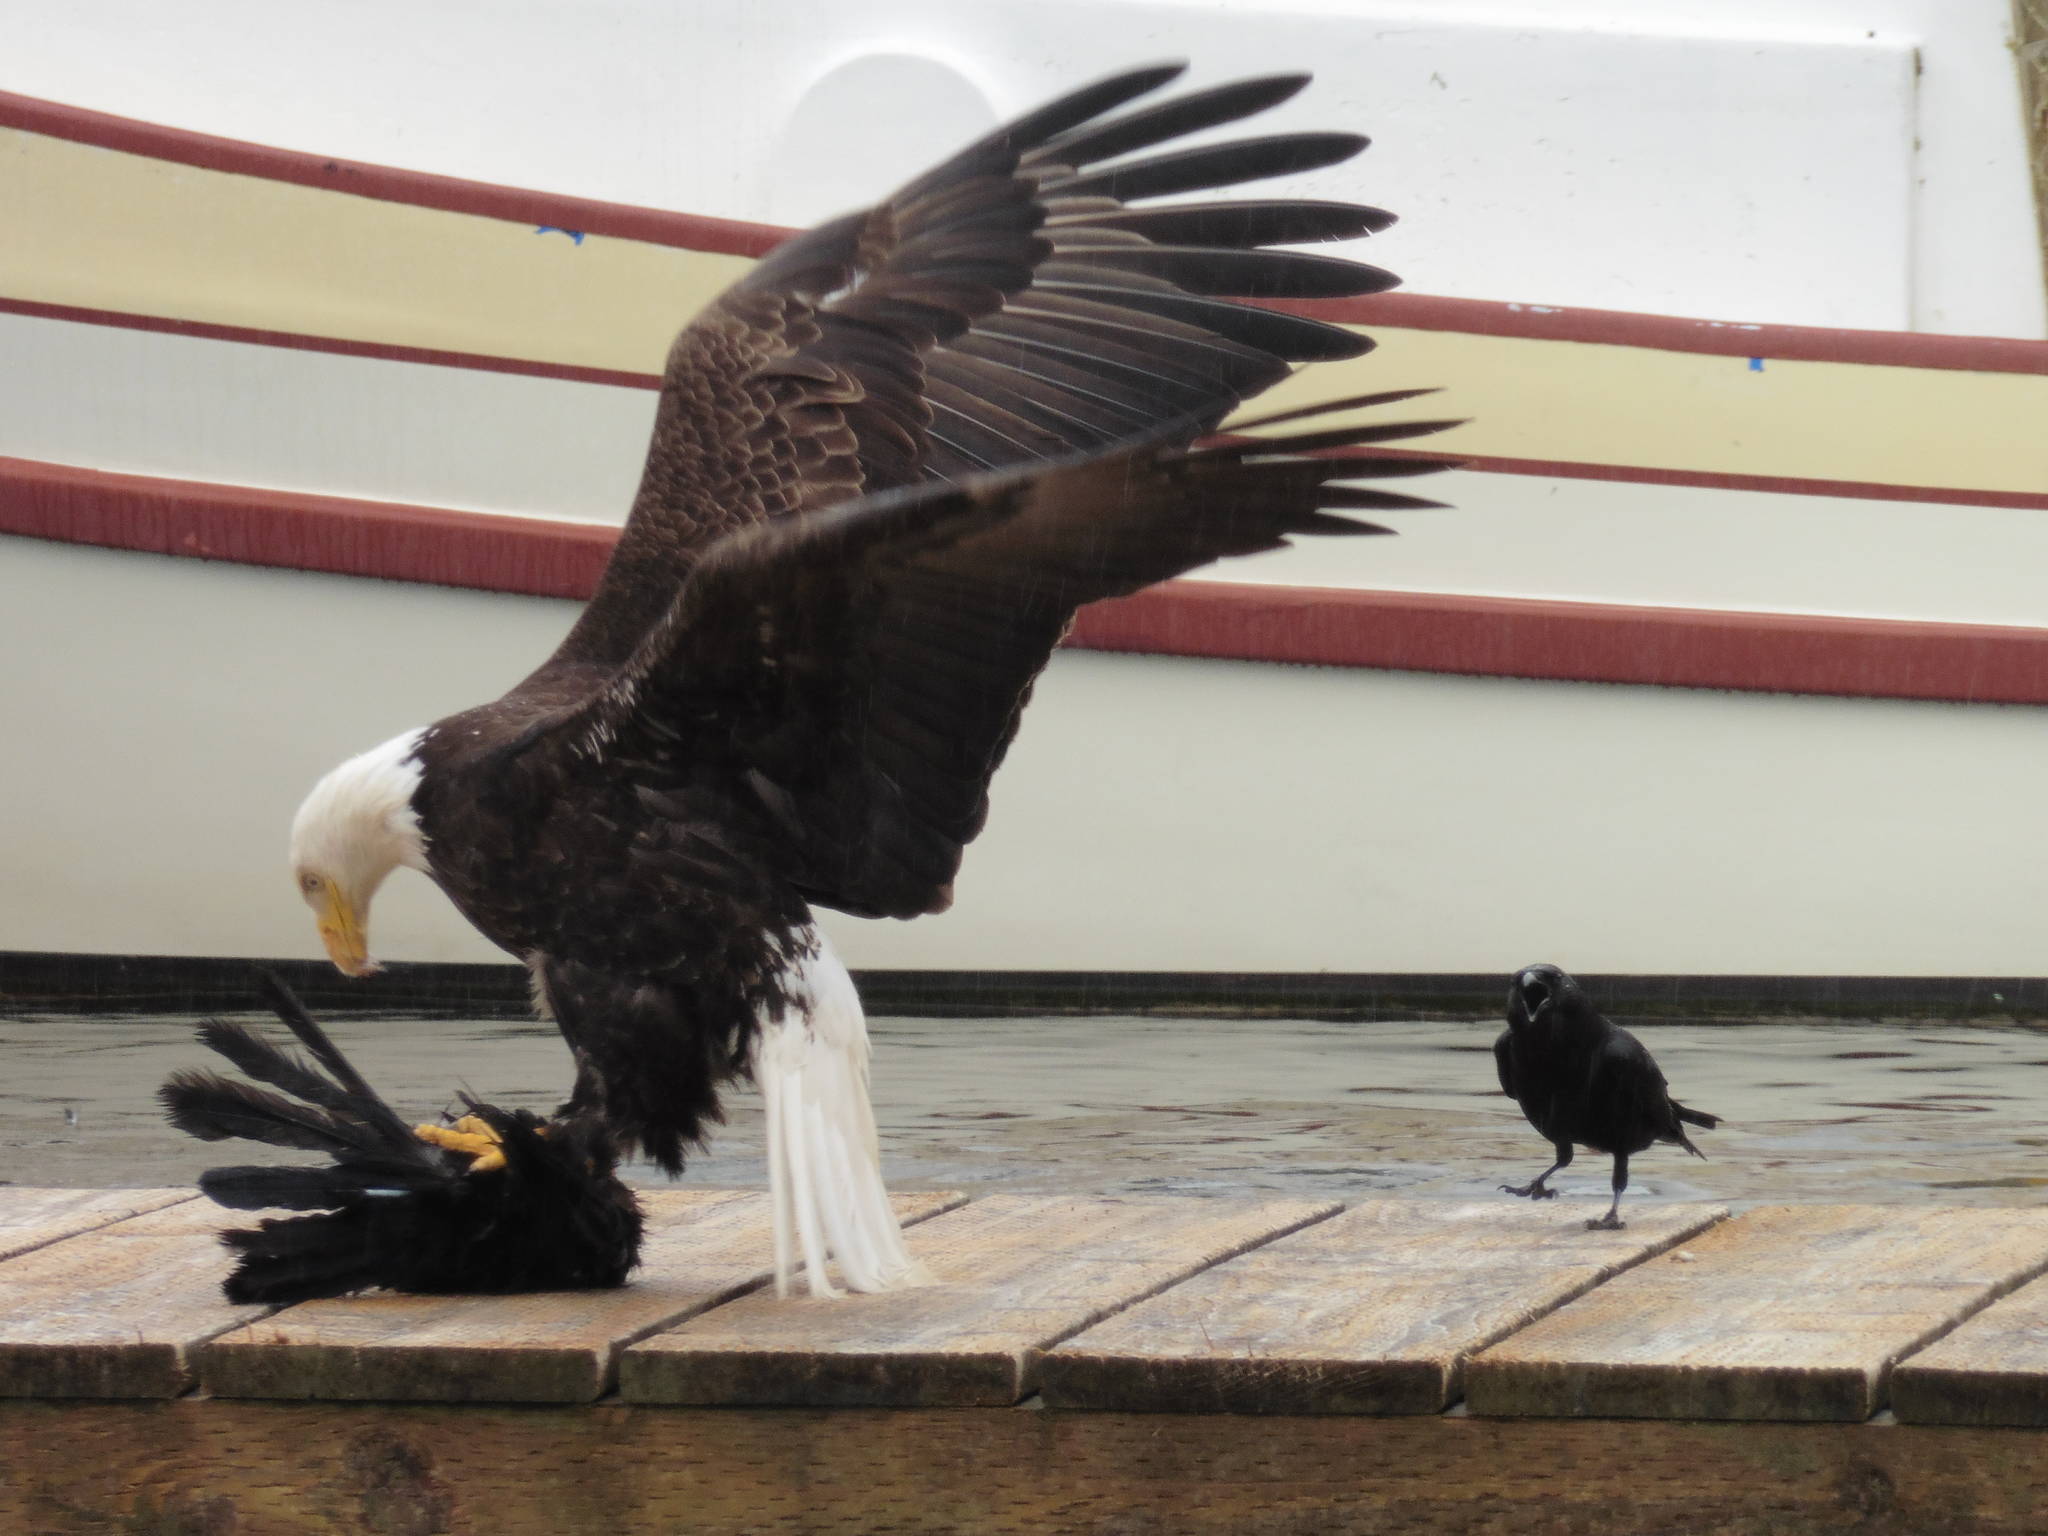 A bald eagle reacts after being harassed while eating a fish in Tee Harbor, Friday, June 19. (Courtesy Photo | David Athearn)